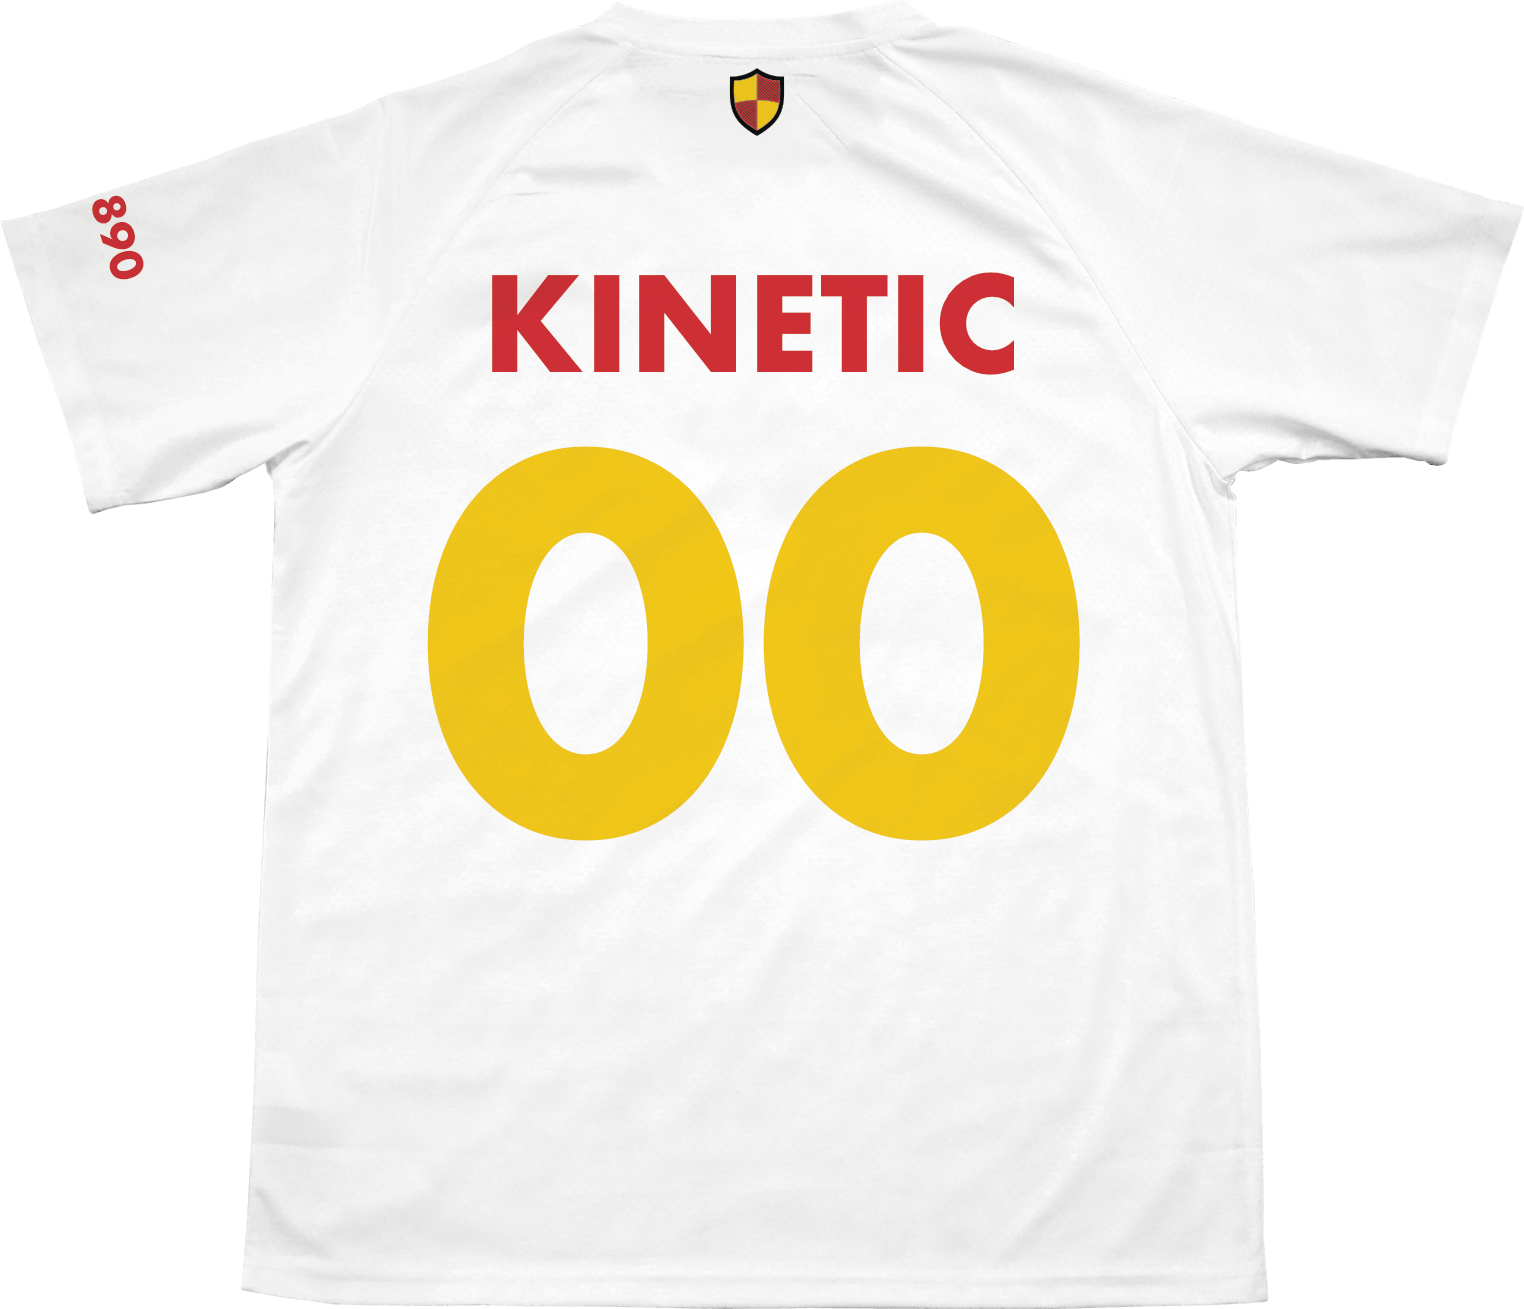 Delta Chi - Home Team Soccer Jersey - Kinetic Society